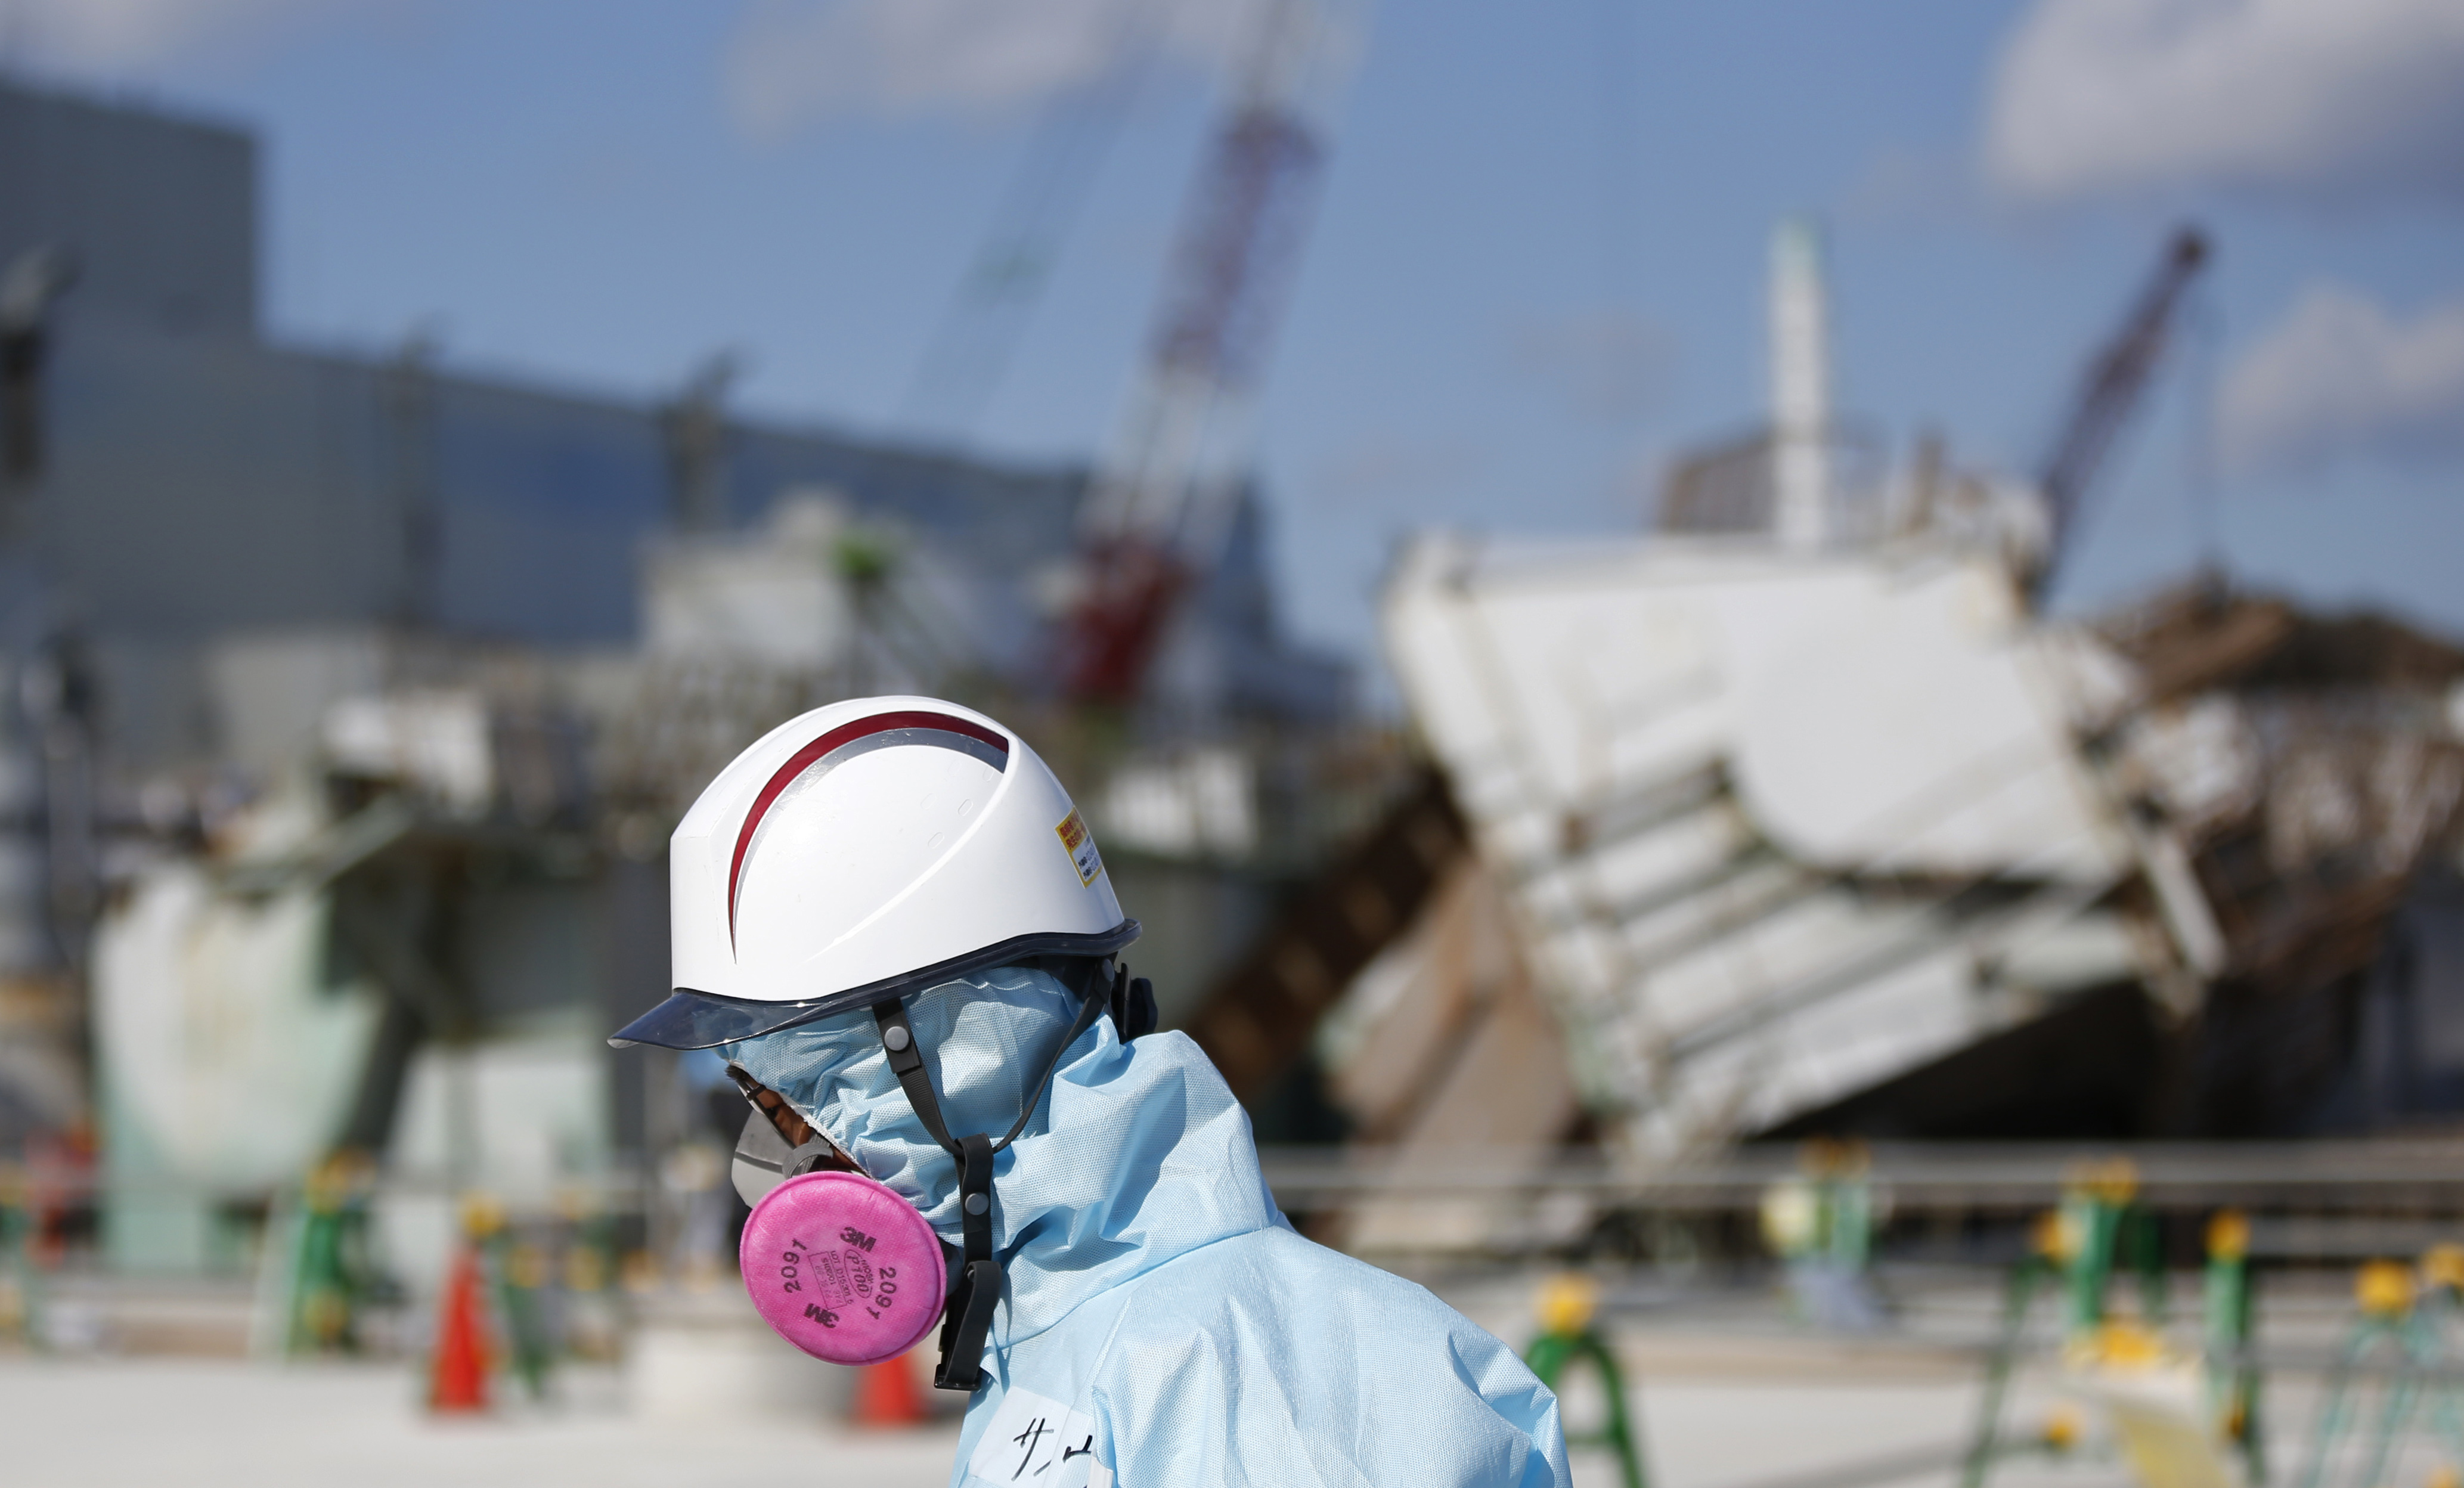 A Tokyo Electric employee in protective gear walks in front of the No. 1 reactor building at the Fukushima No. 1 nuclear power plant in the town of Okuma, Fukushima Prefecture, on Feb. 10. | BLOOMBERG